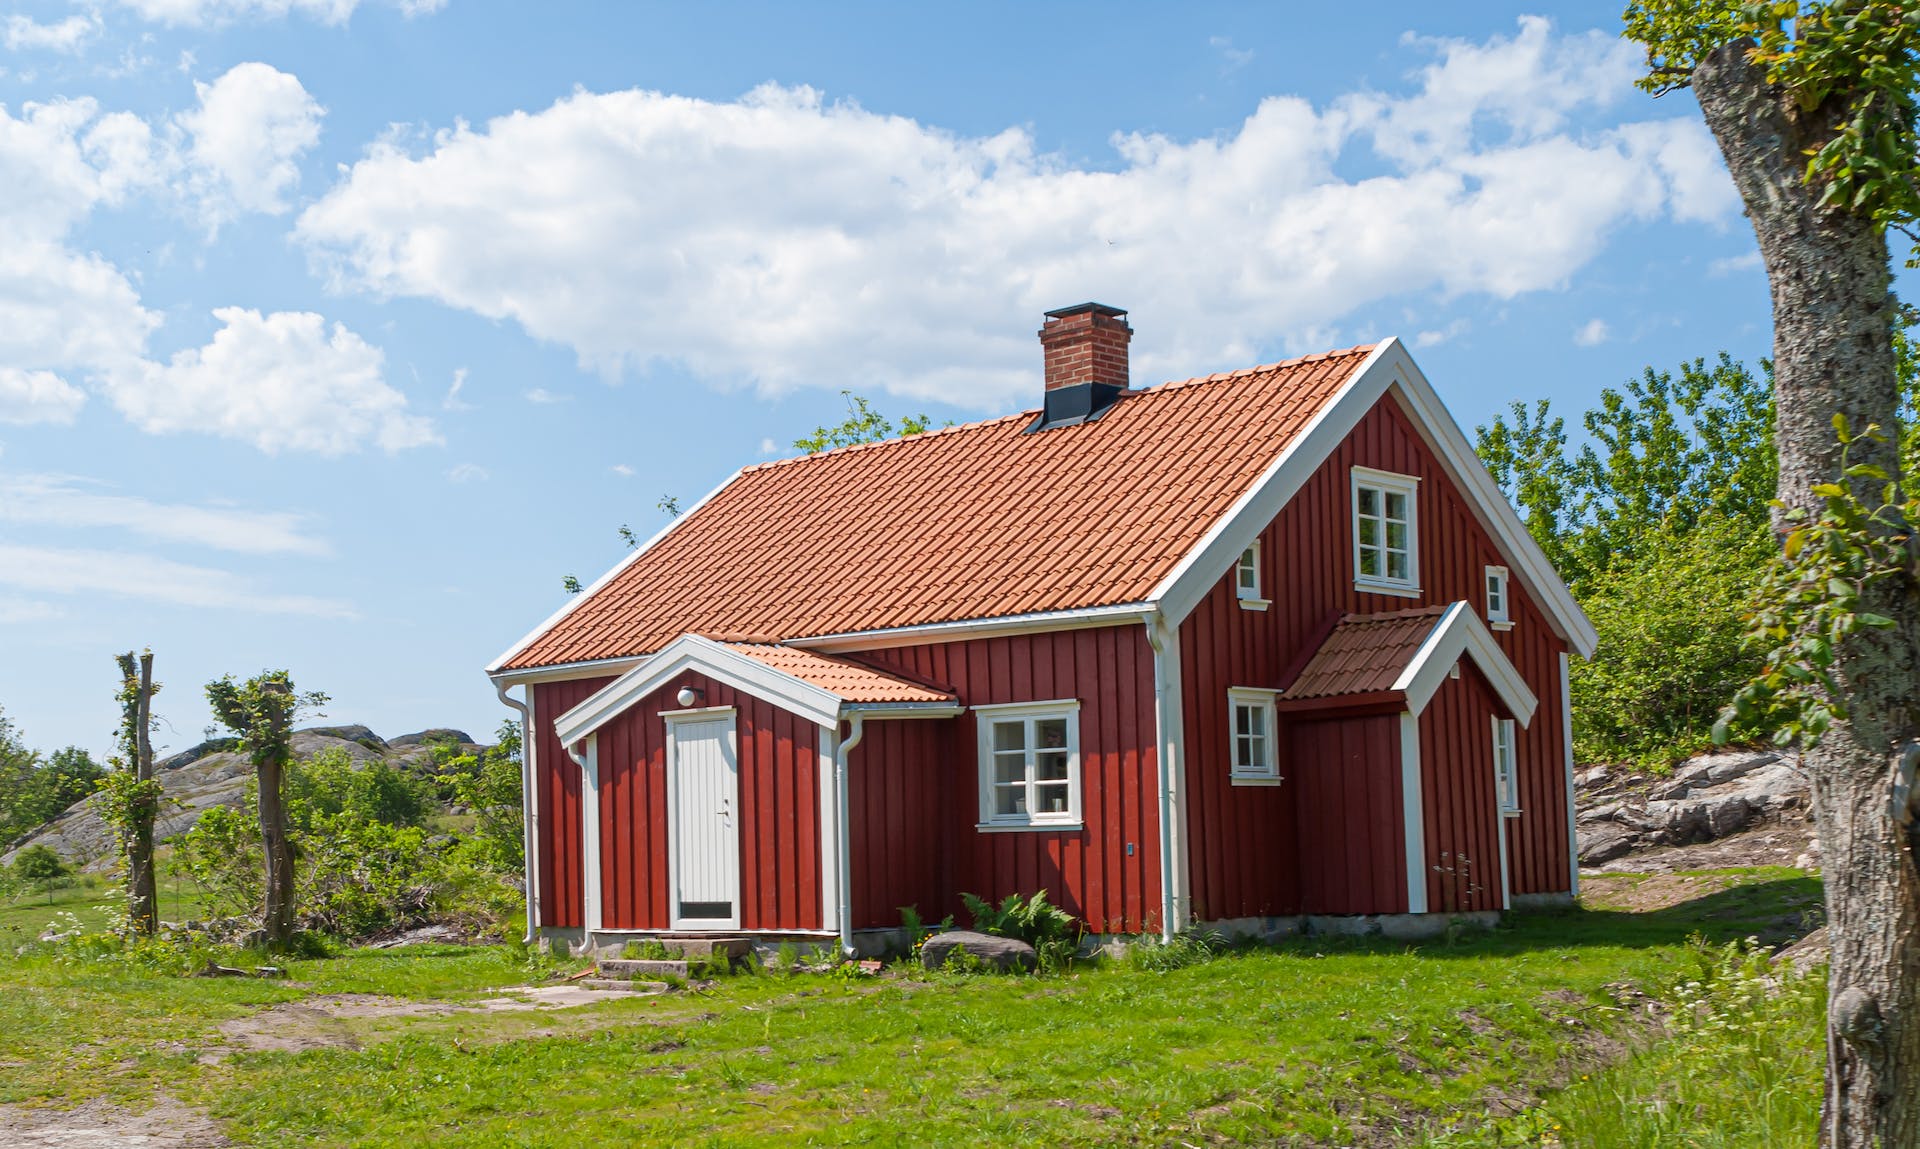 A red barn house | Source: Pexels